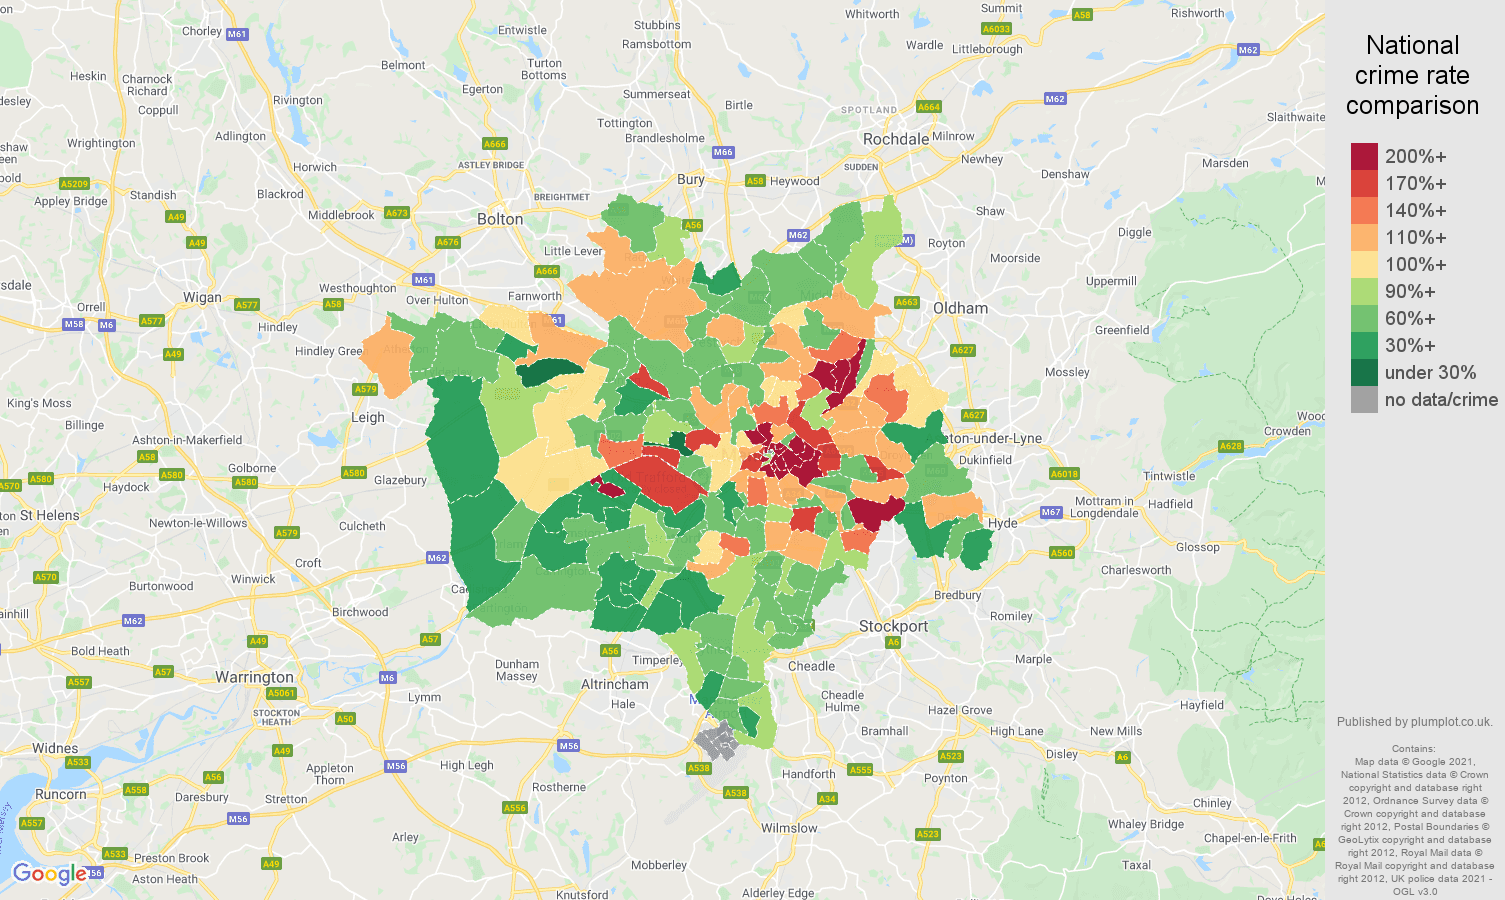 Manchester other theft crime rate comparison map